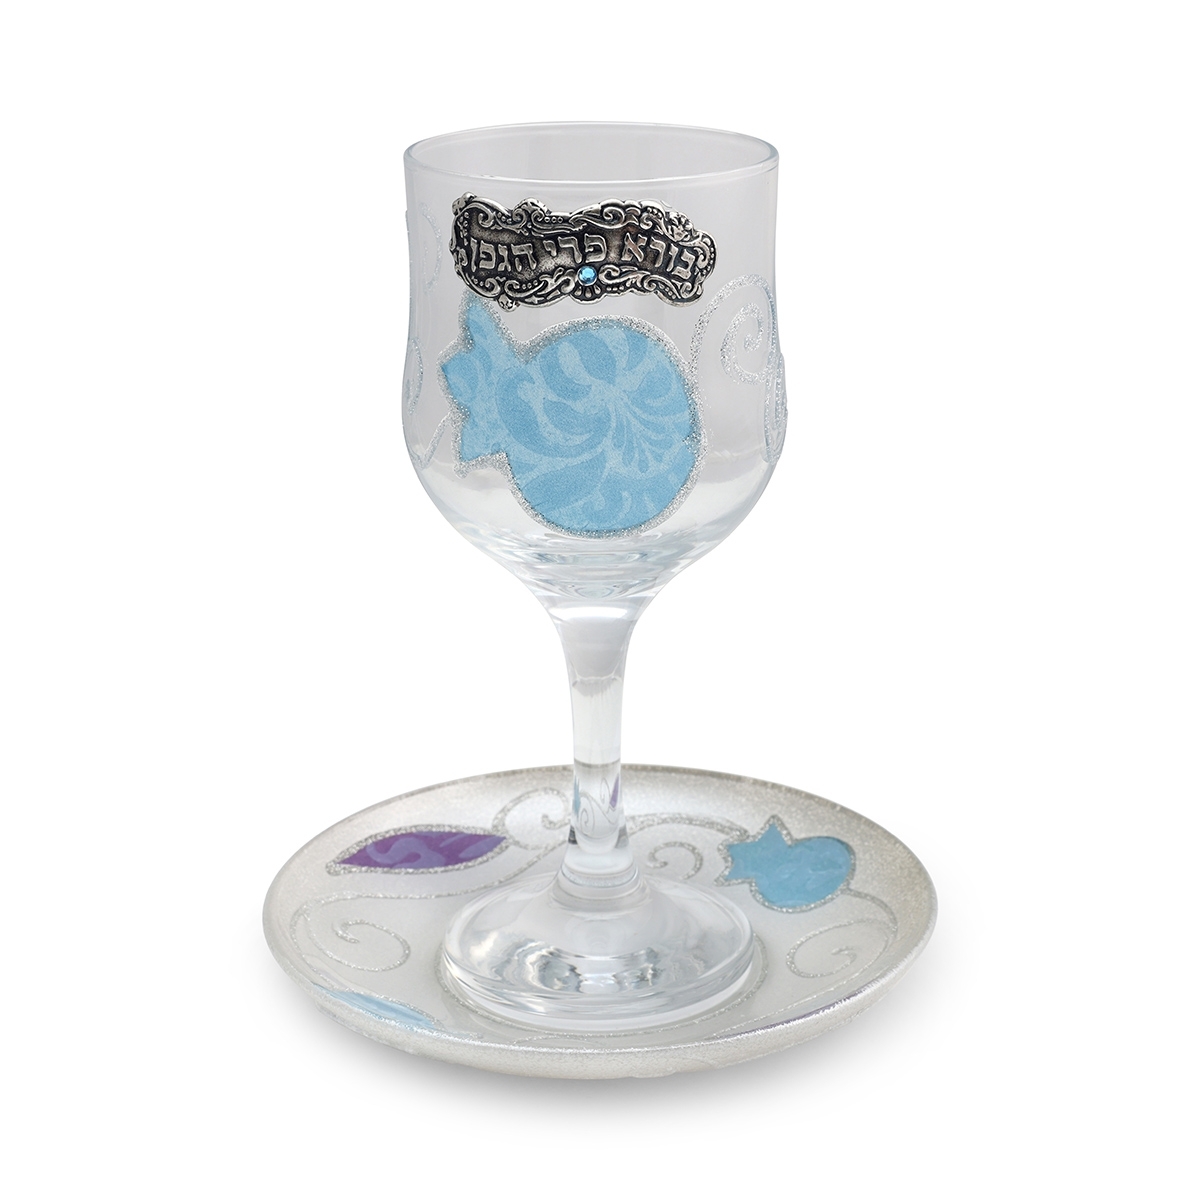 Handmade Glass Kiddush Cup Set With Pomegranate Design By Lily Art (Blue & Purple) - 1